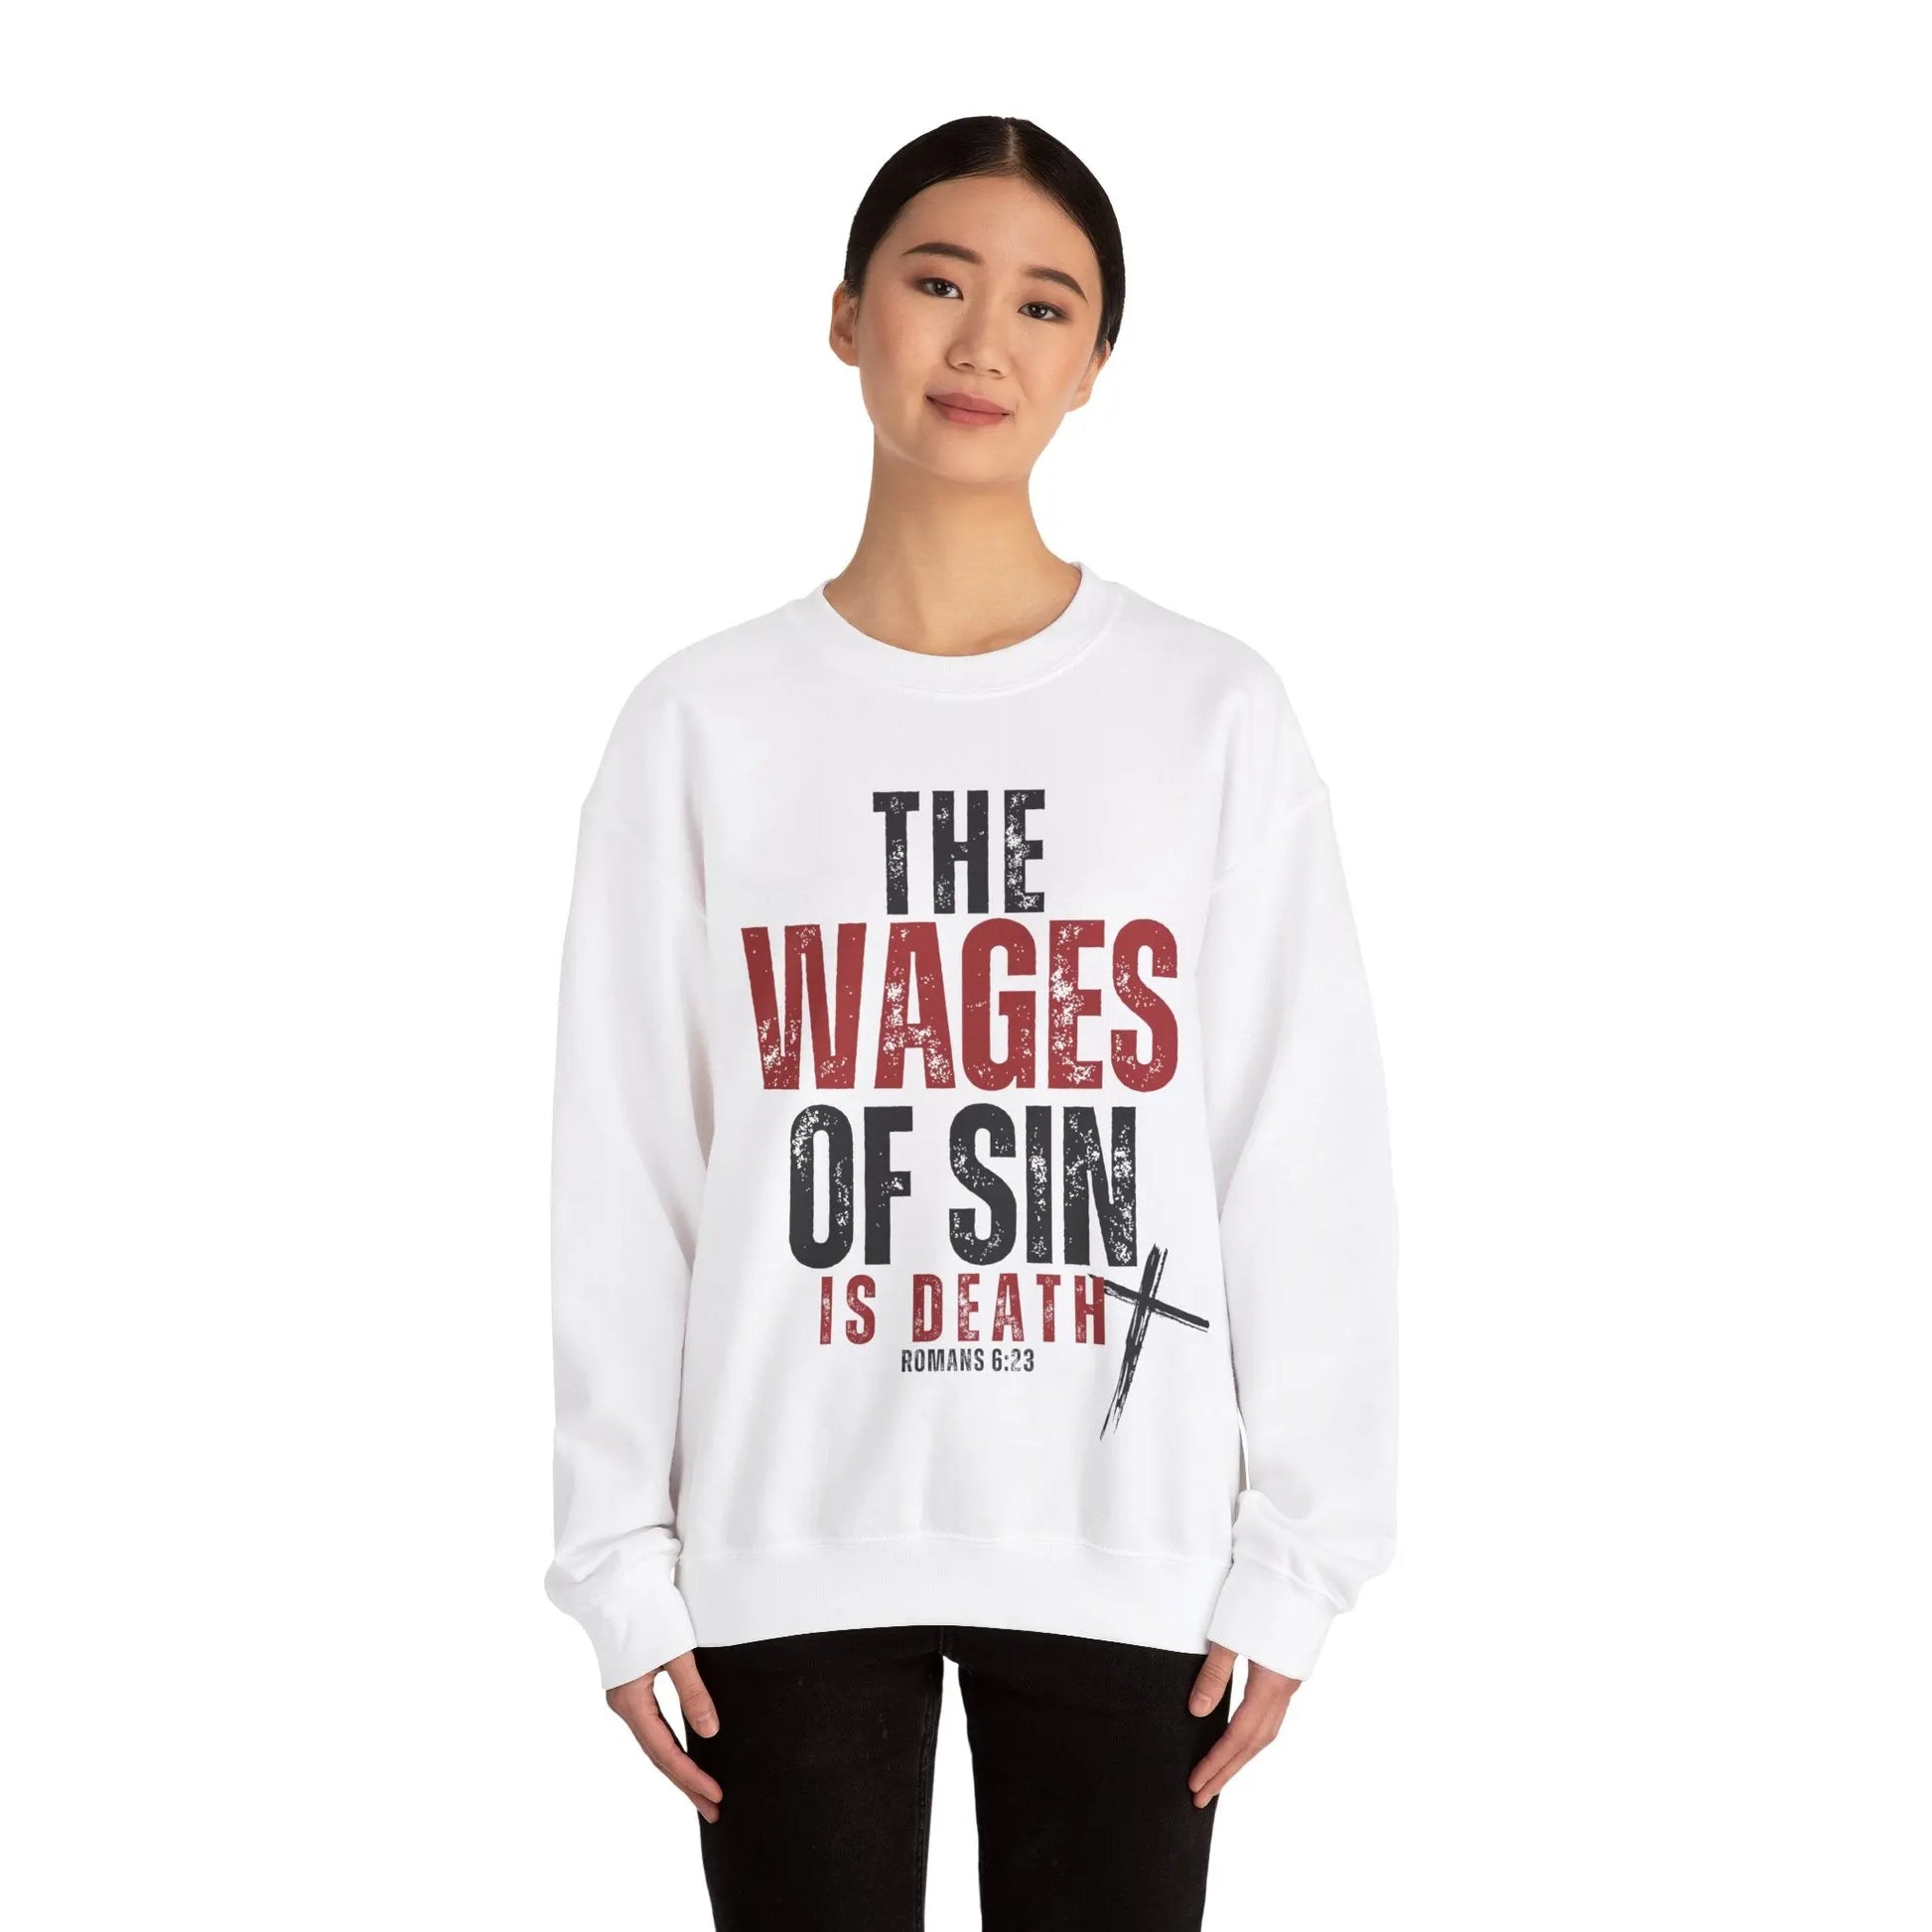 Romans 6:23 The Wages of Sin is Death Bible Verse Scripture Christian Mens Faith God Jesus Bible Christian Gifts Crewneck Sweatshirt - Stay Tomorrow Needs You Romans 6:23 The Wages of Sin is Death Bible Verse Scripture Christian Mens Faith God Jesus Bible Christian Gifts Crewneck Sweatshirt